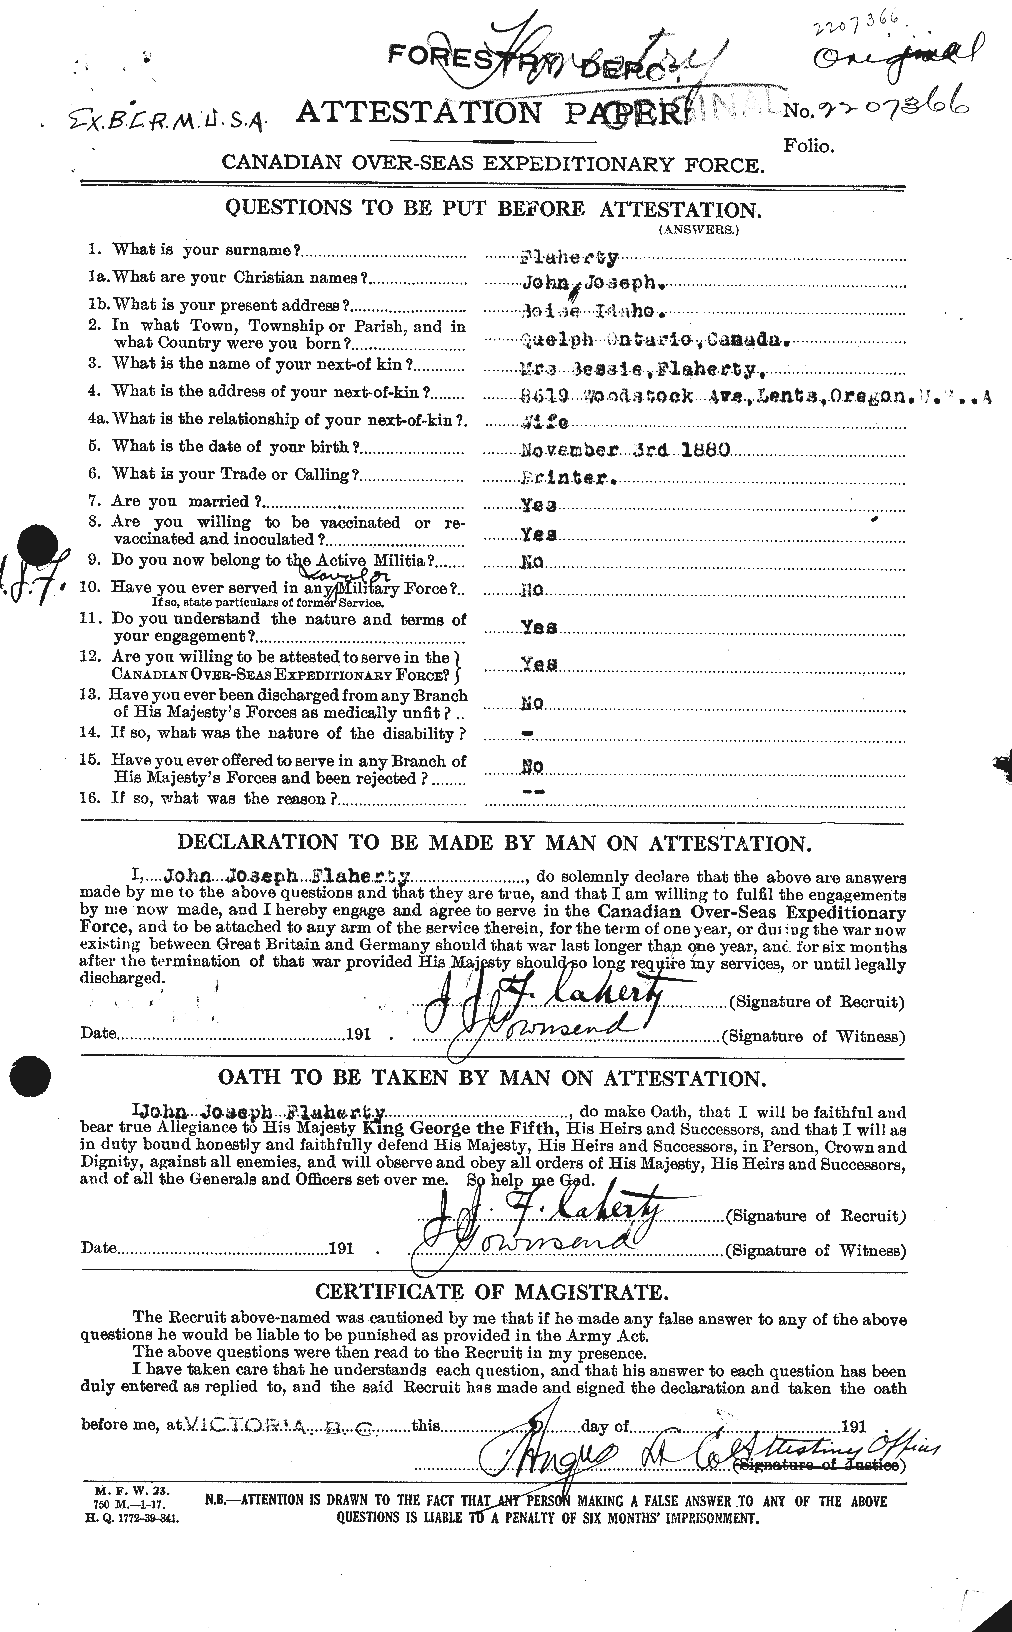 Personnel Records of the First World War - CEF 323365a